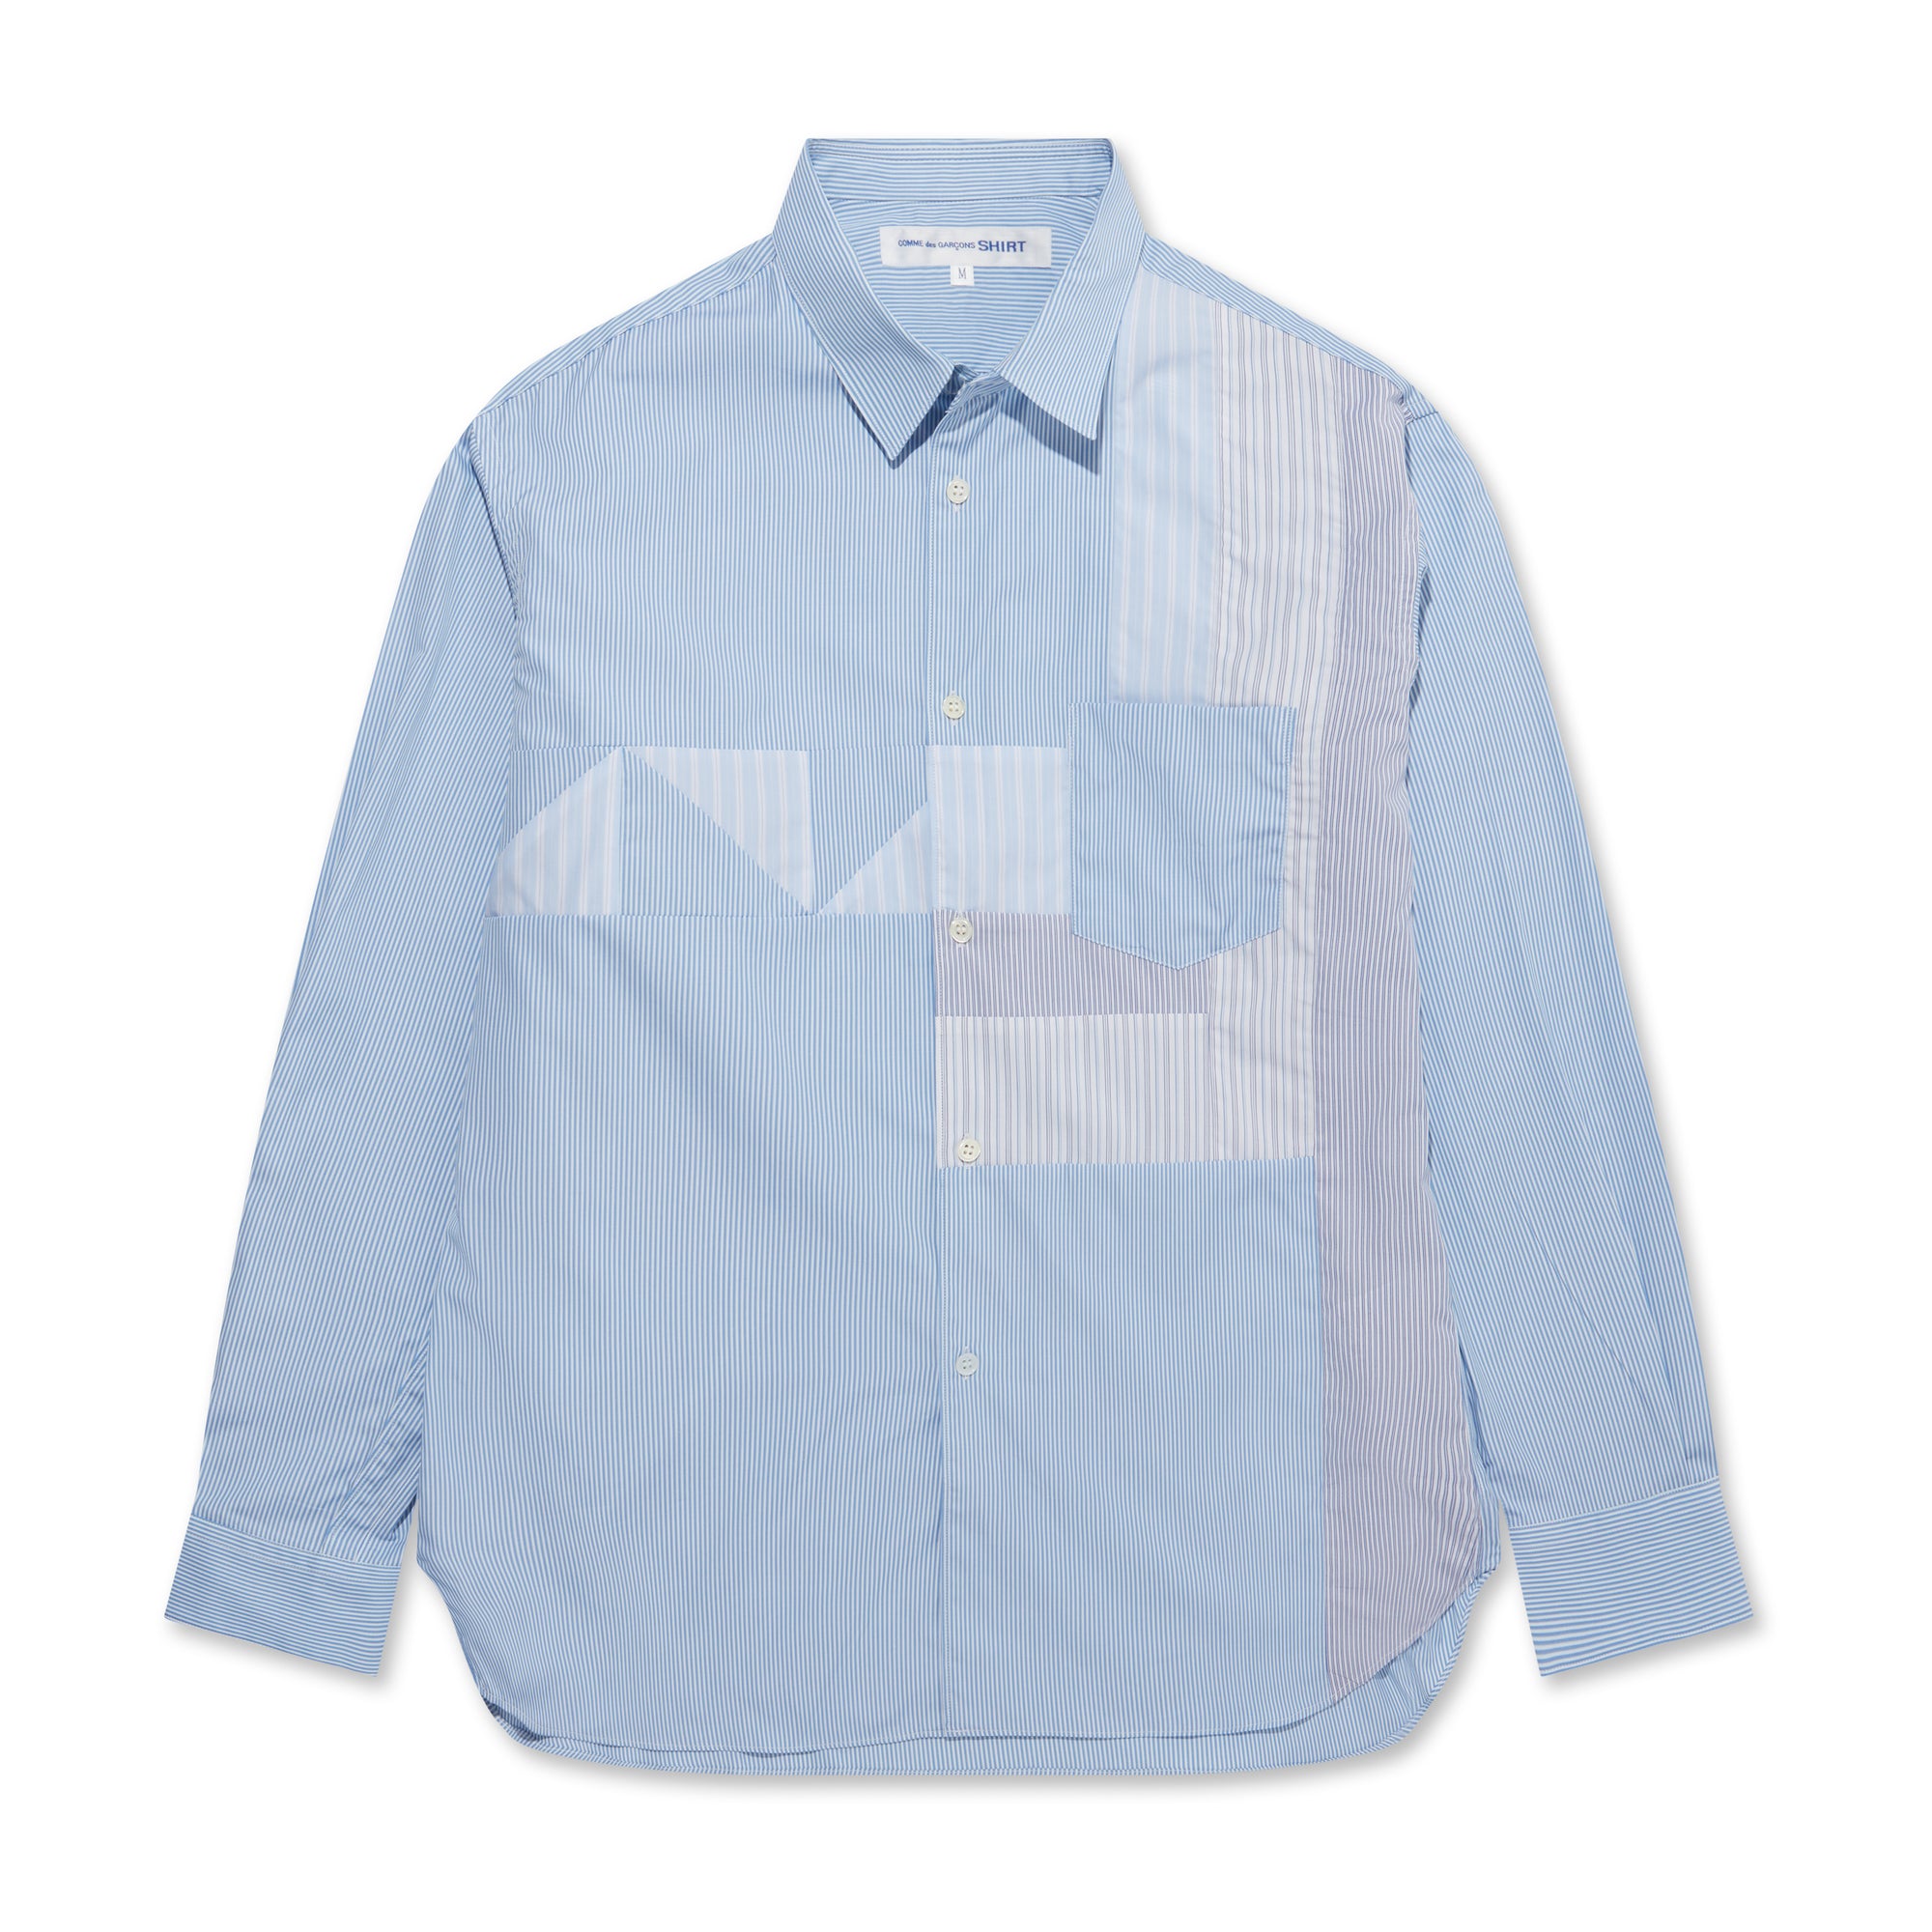 CDG Shirt Forever - Classic Fit Patchwork Stripe Shirt - (Stripe/Mix) view 1